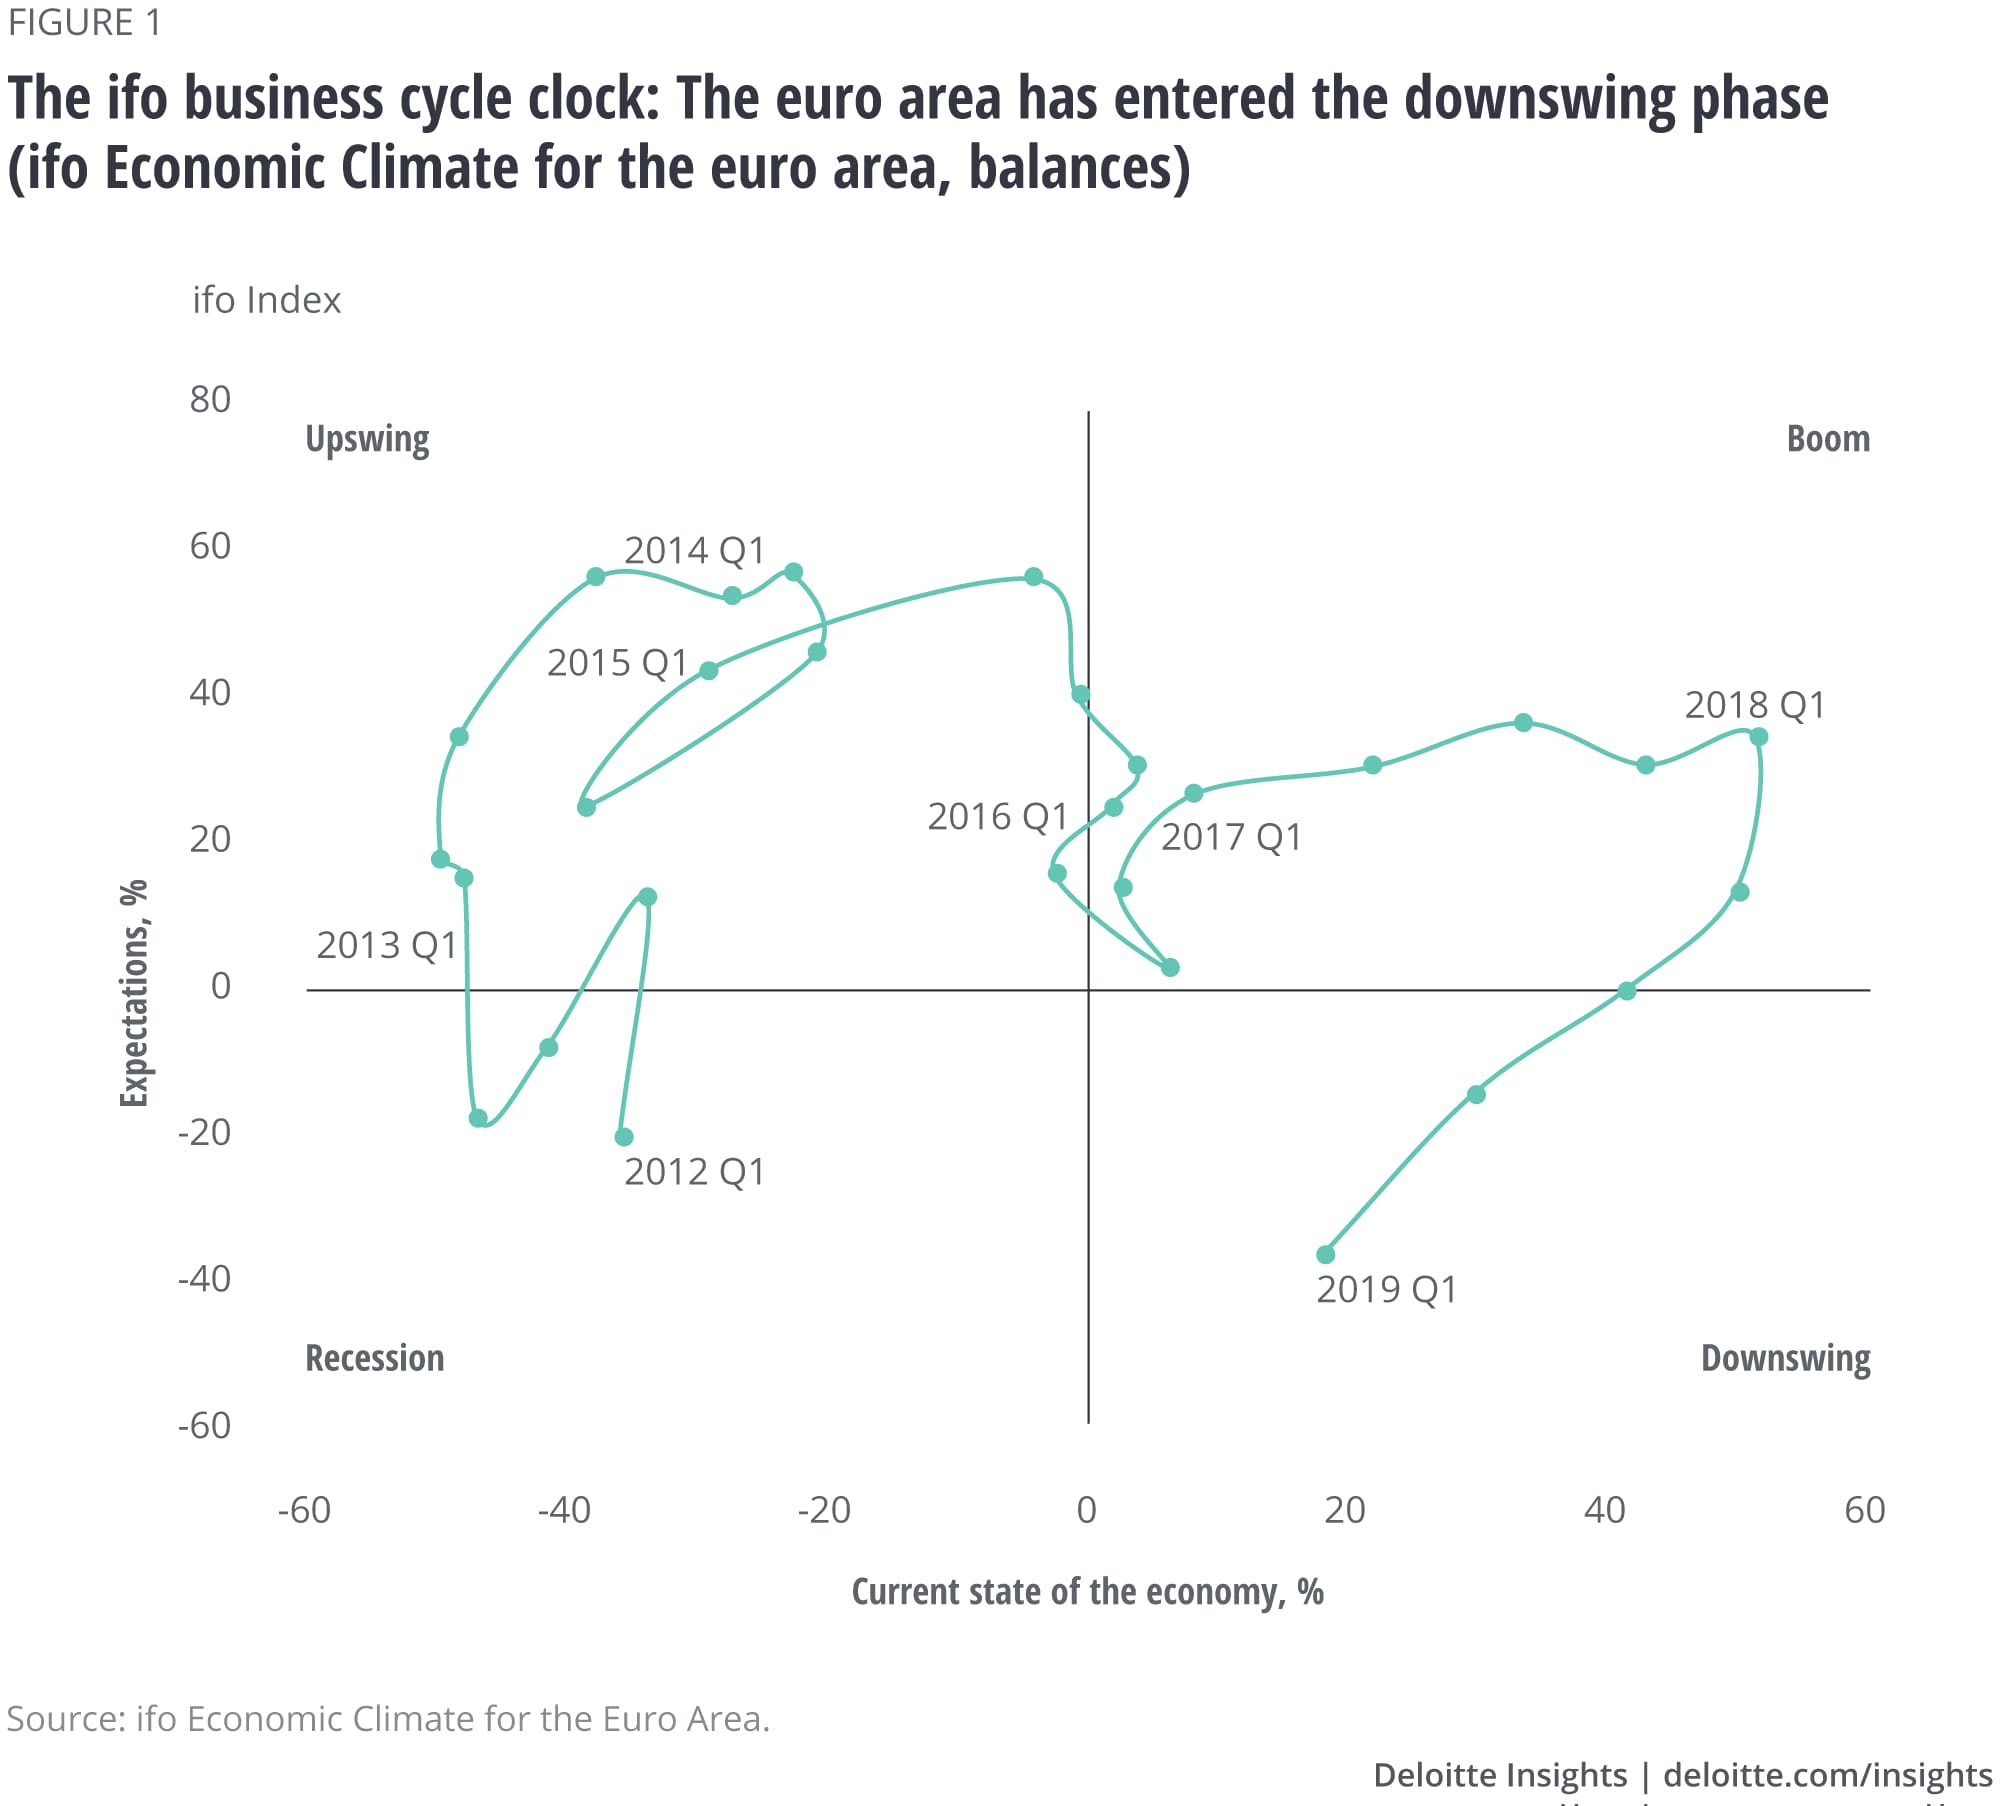 The ifo business cycle clock: The euro area has entered the downswing phase (ifo Economic Climate for the euro area, balances)